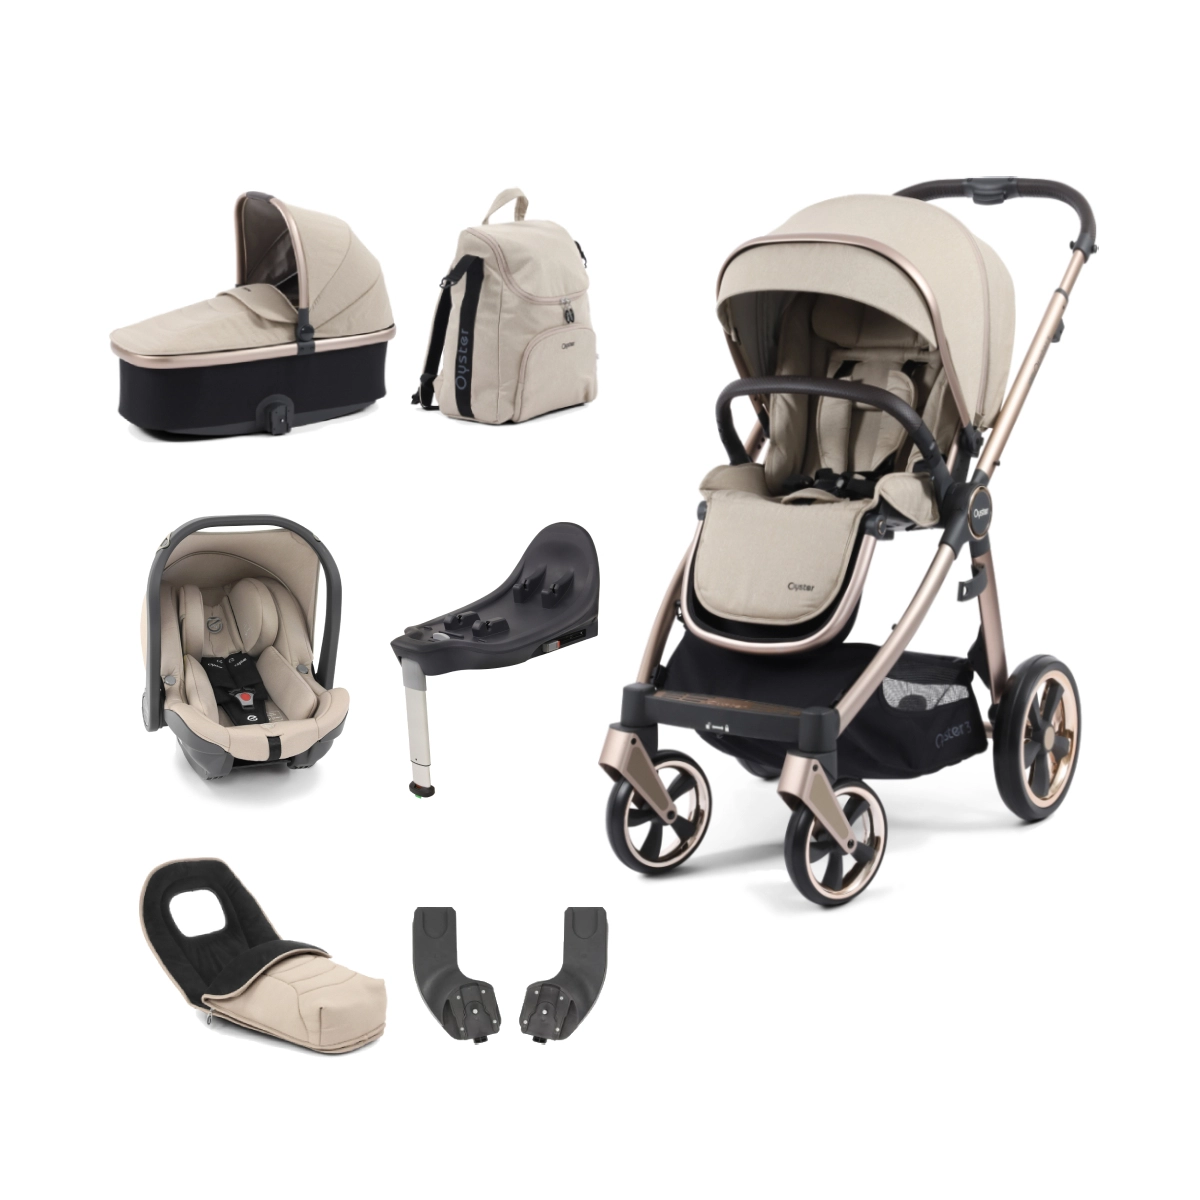 BabyStyle Oyster 3 Champagne Chassis 7 Piece Luxury Travel System